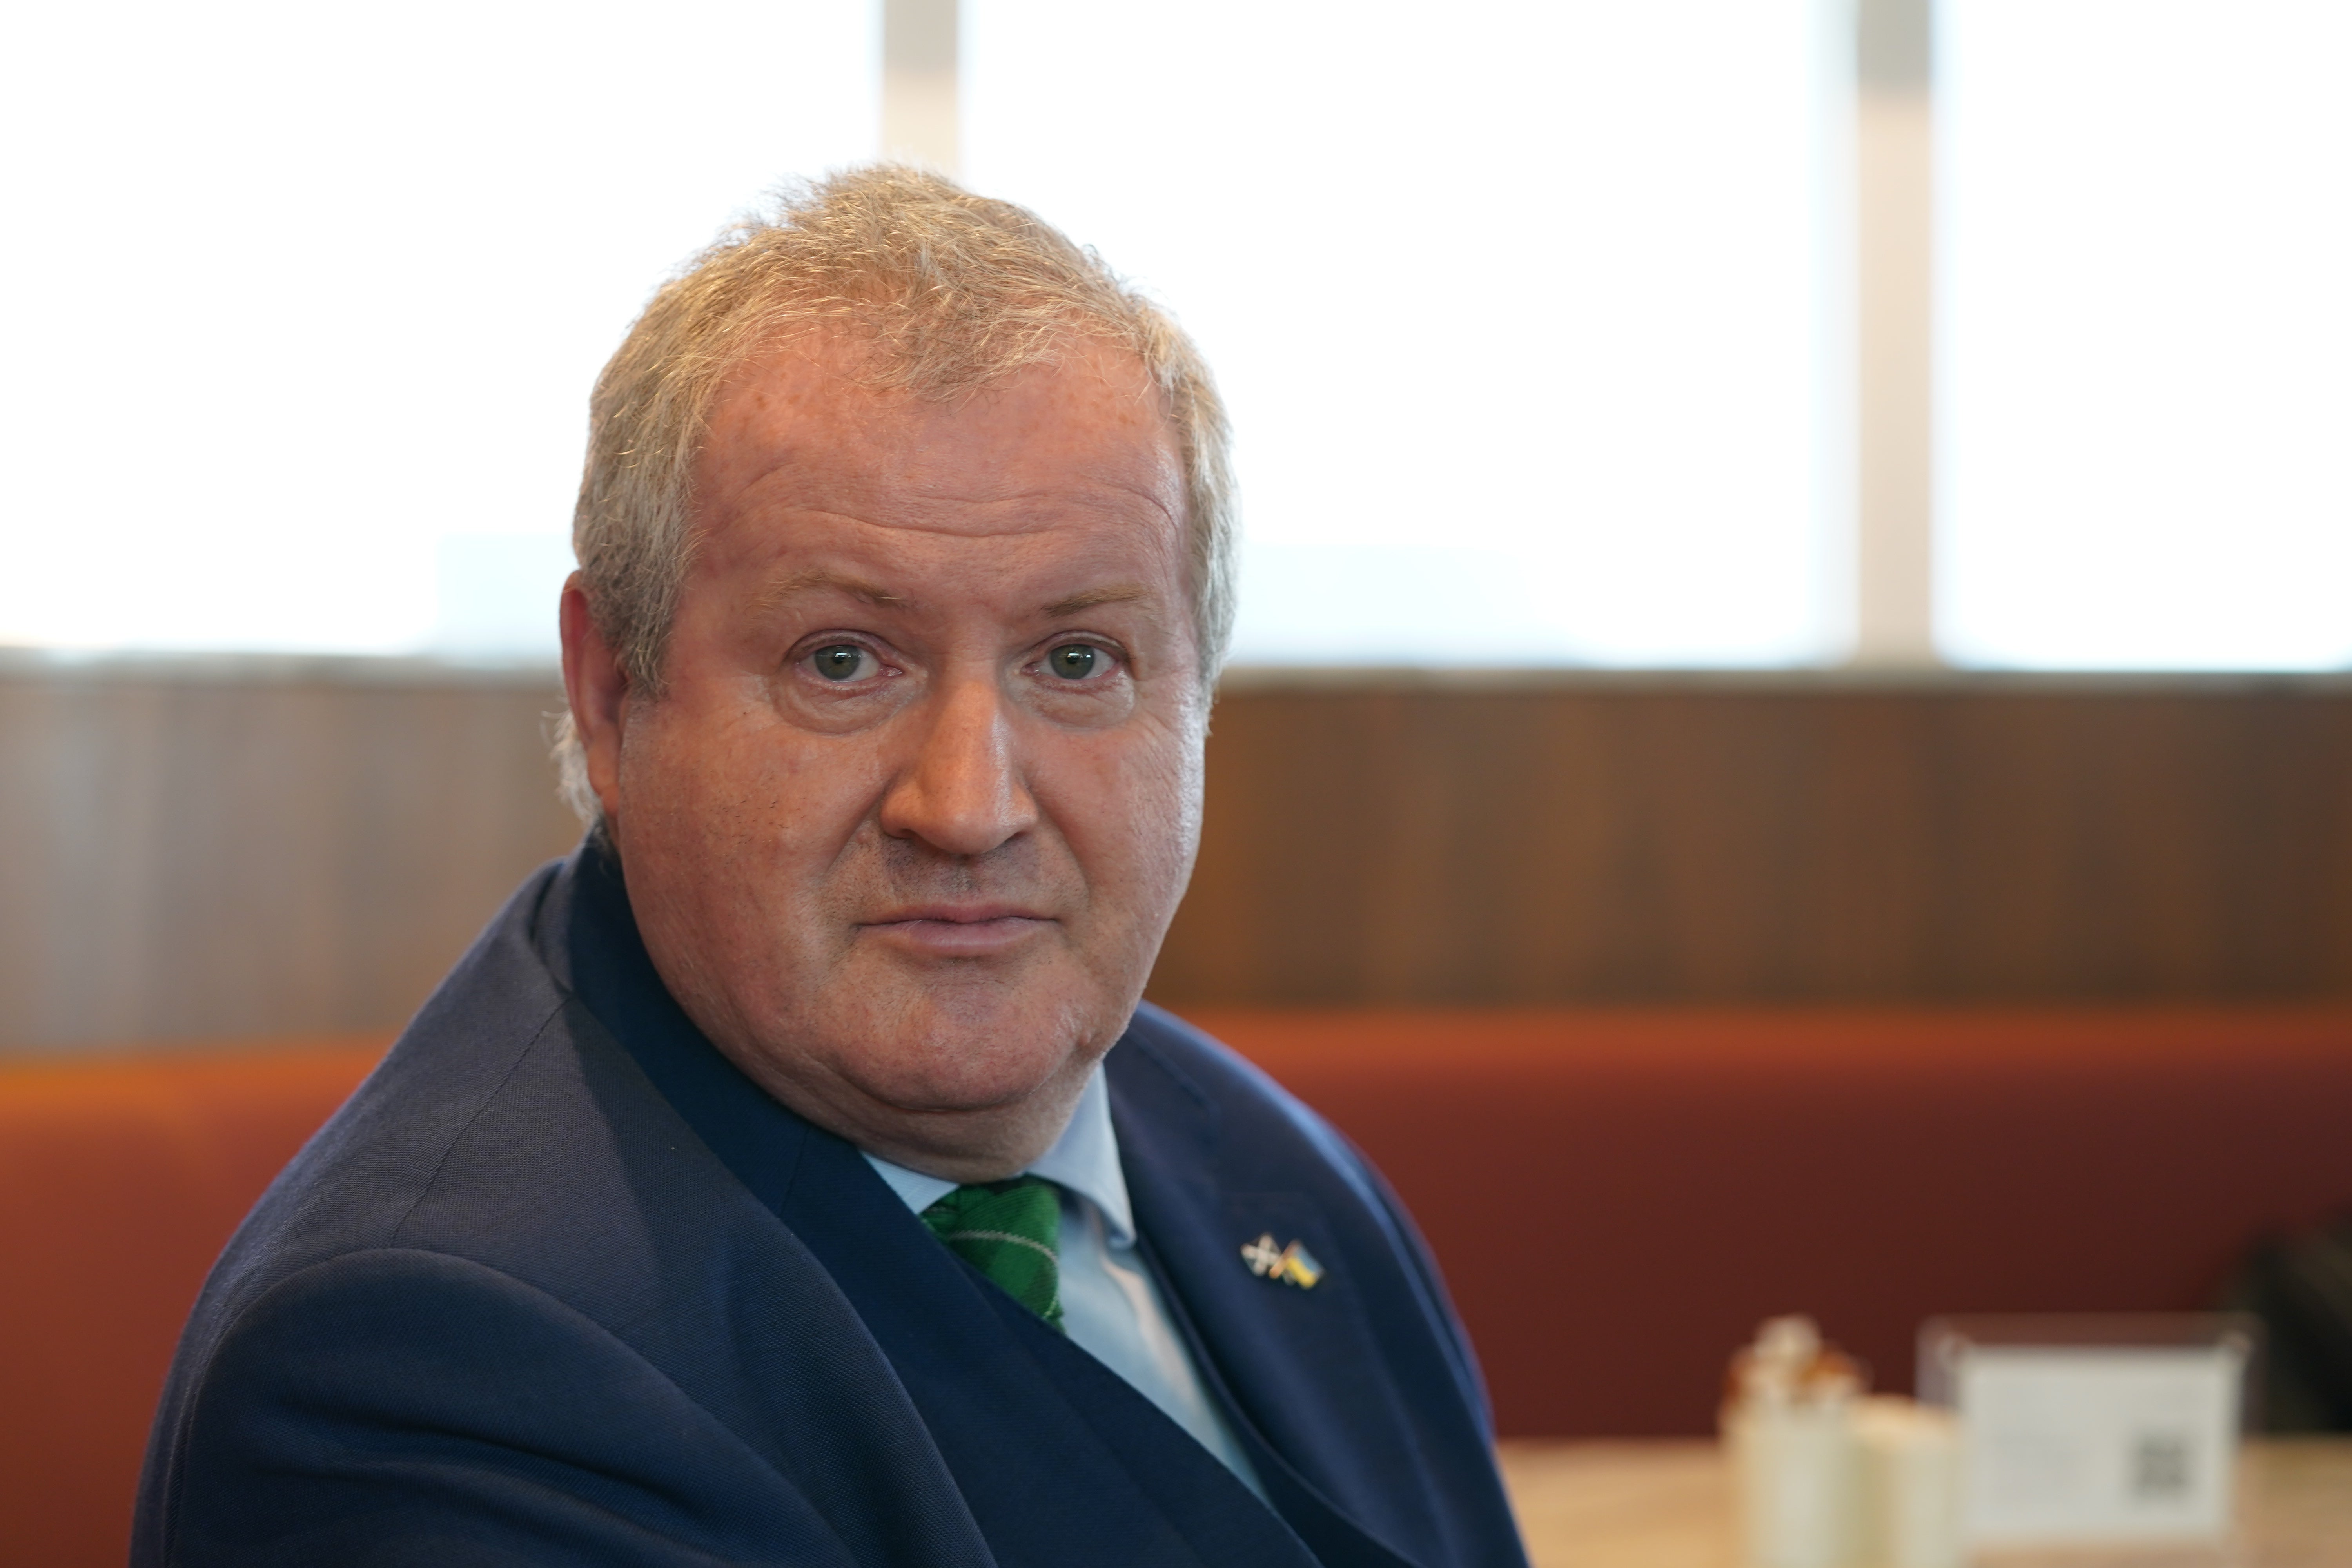 SNP Westminster leader Ian Blackford said he was ‘absolutely delighted’ the paperwork had been issued (Steve Parsons/PA )